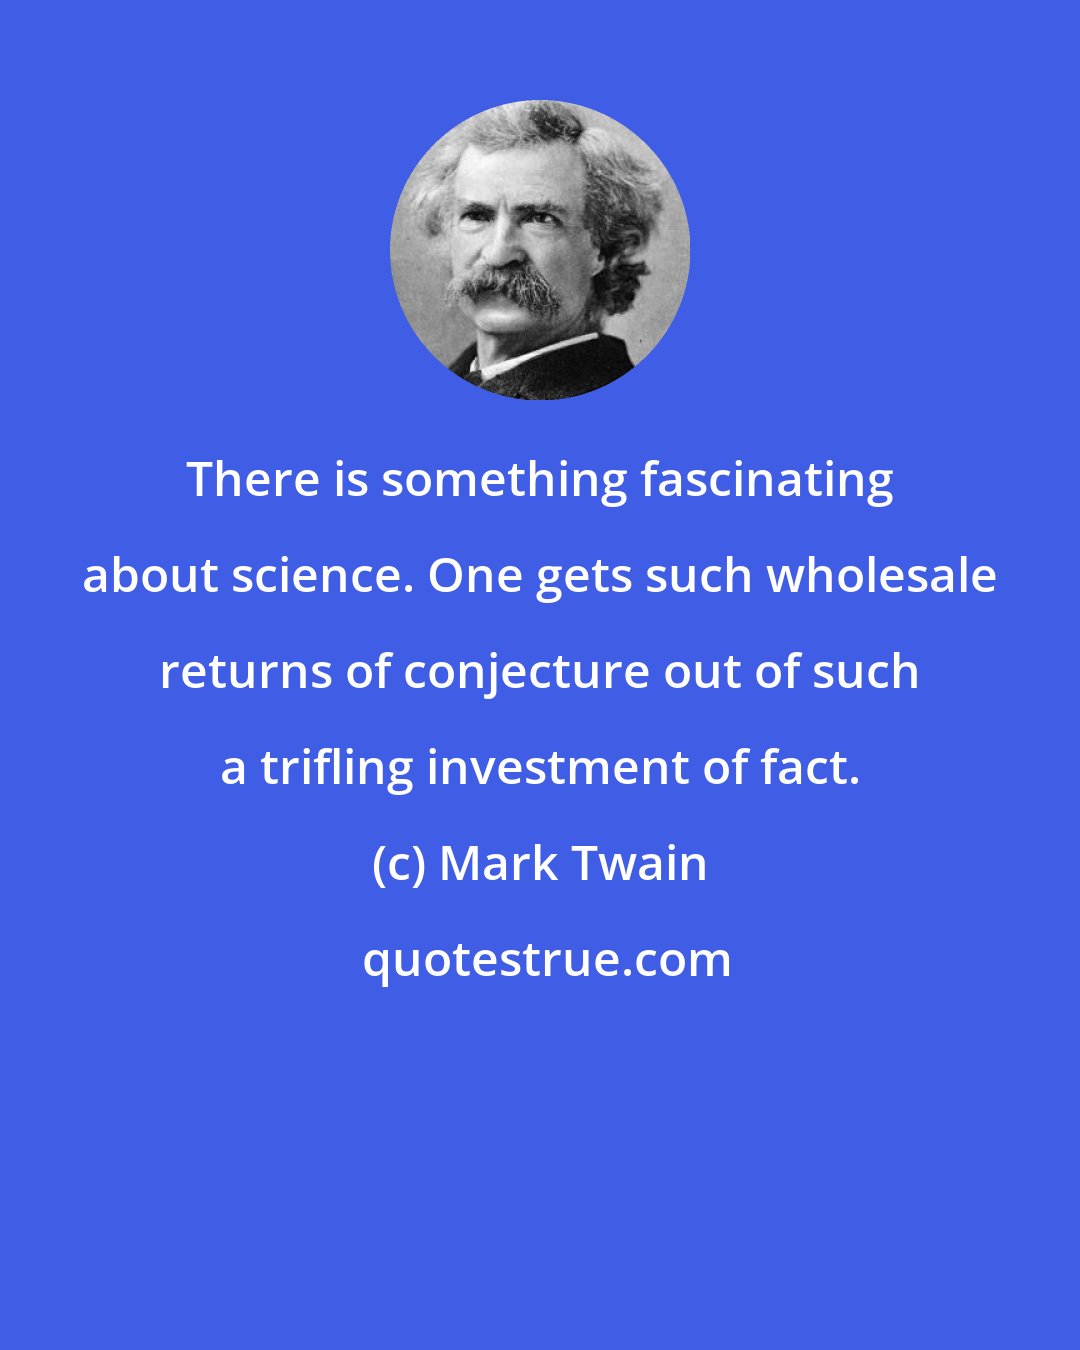 Mark Twain: There is something fascinating about science. One gets such wholesale returns of conjecture out of such a trifling investment of fact.